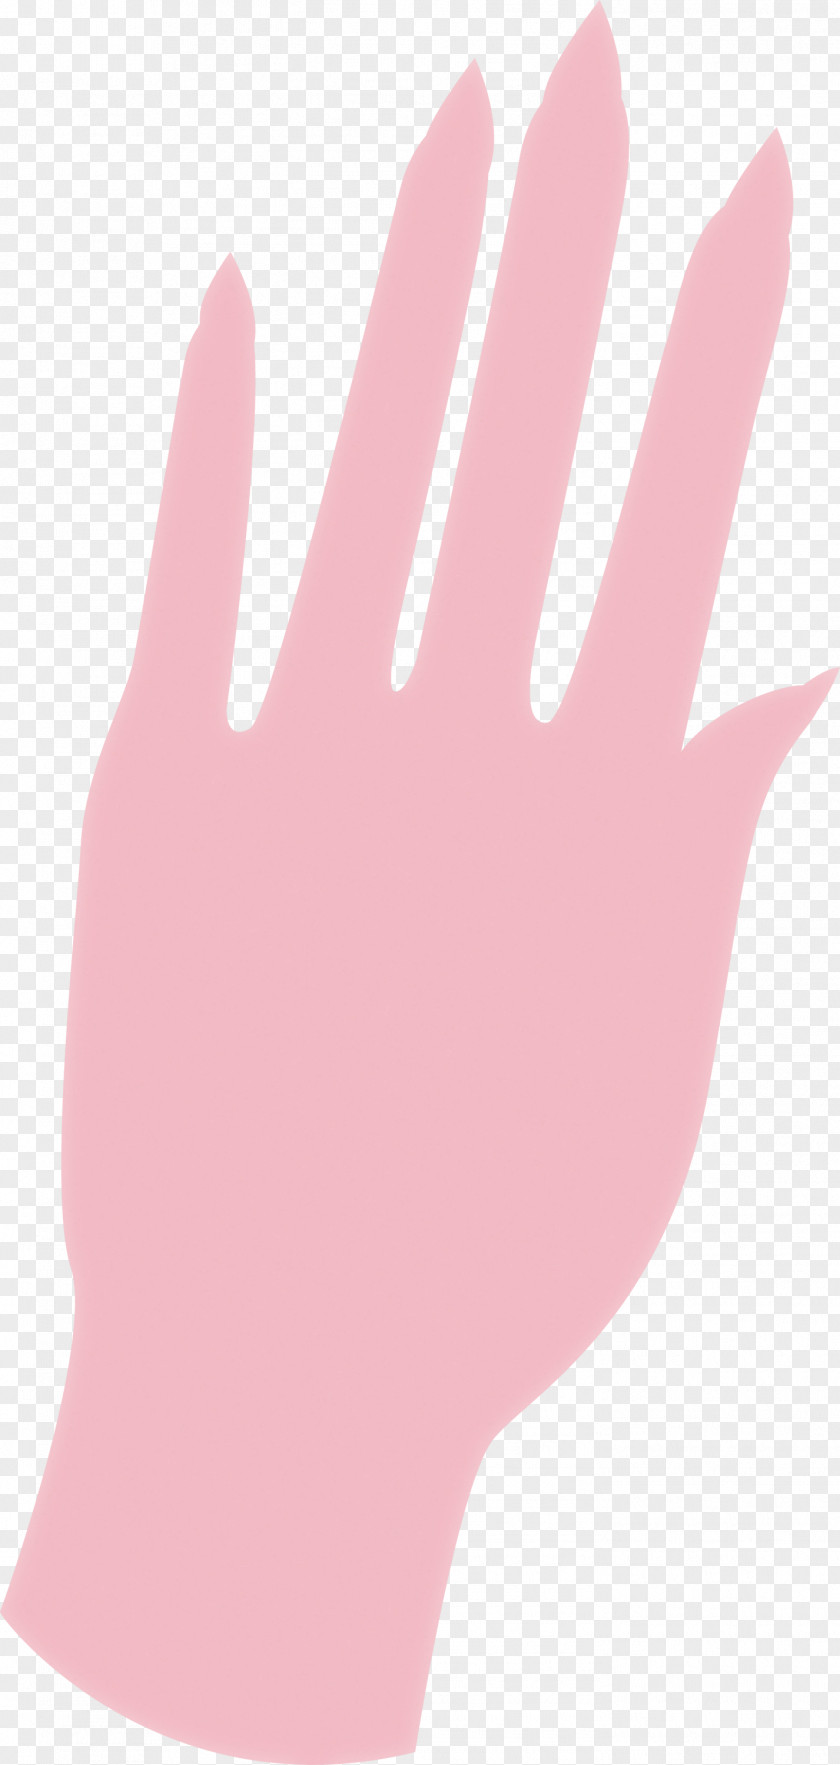 Rubber Glove PNG